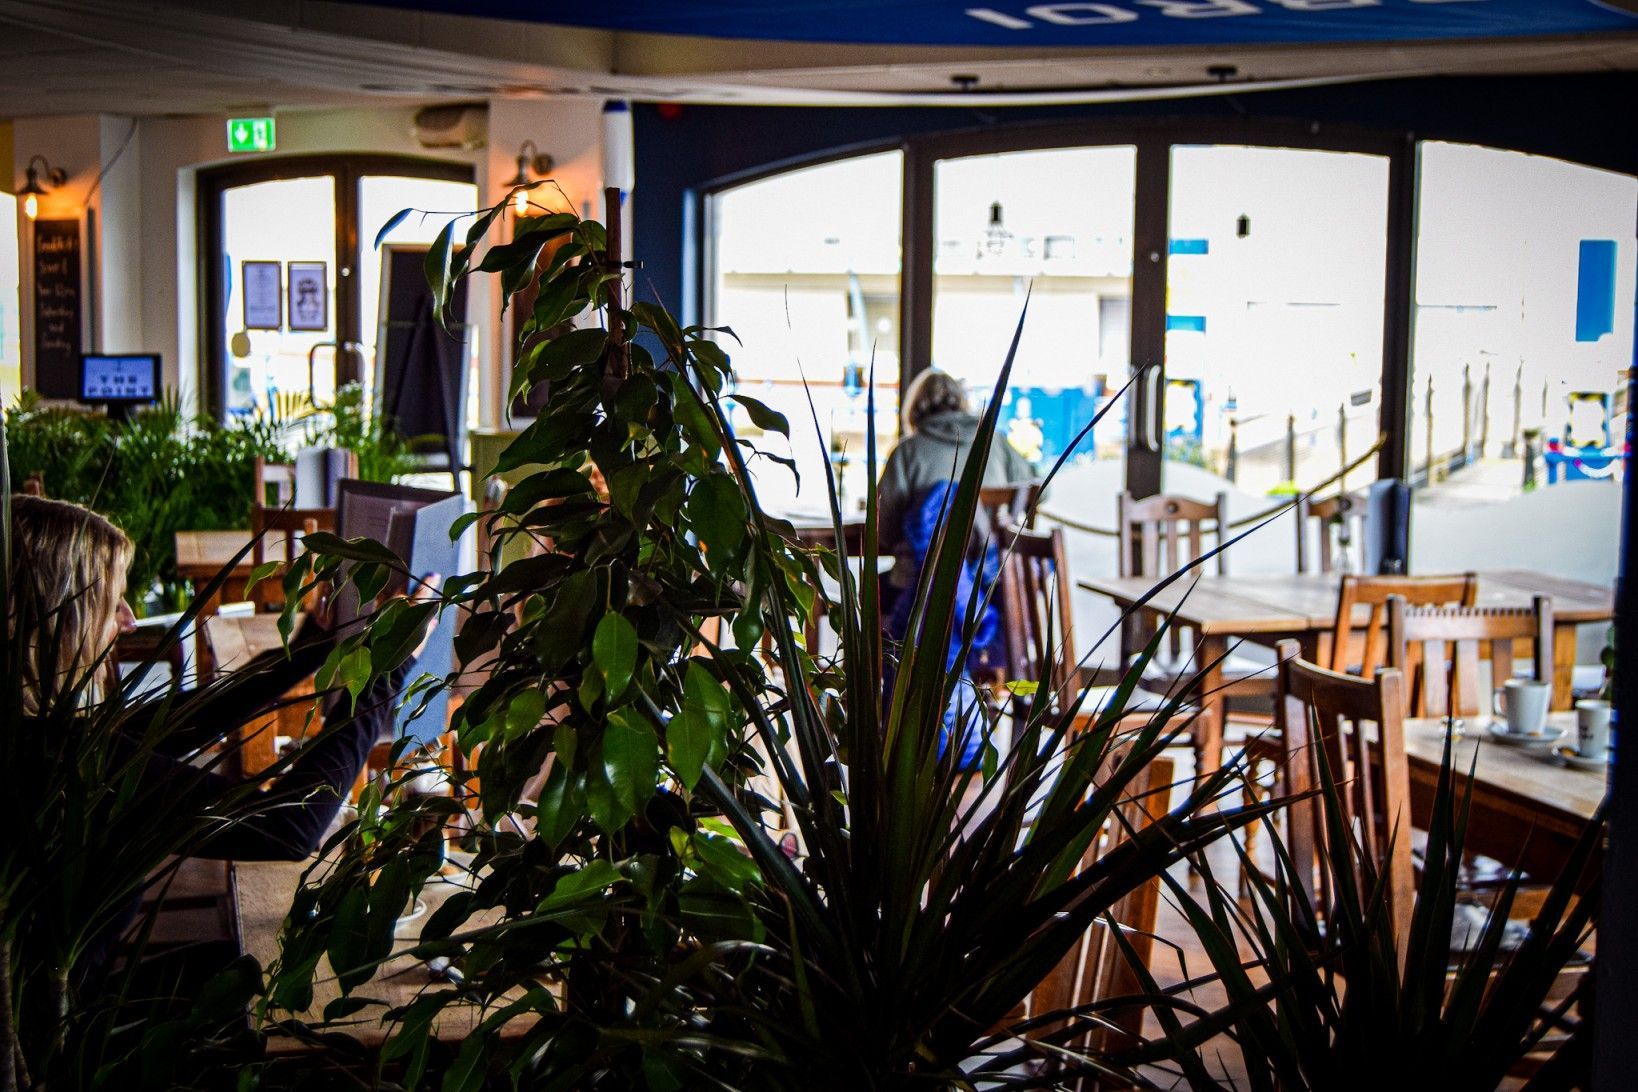 Plants and seating area in a casual dining restaurant.